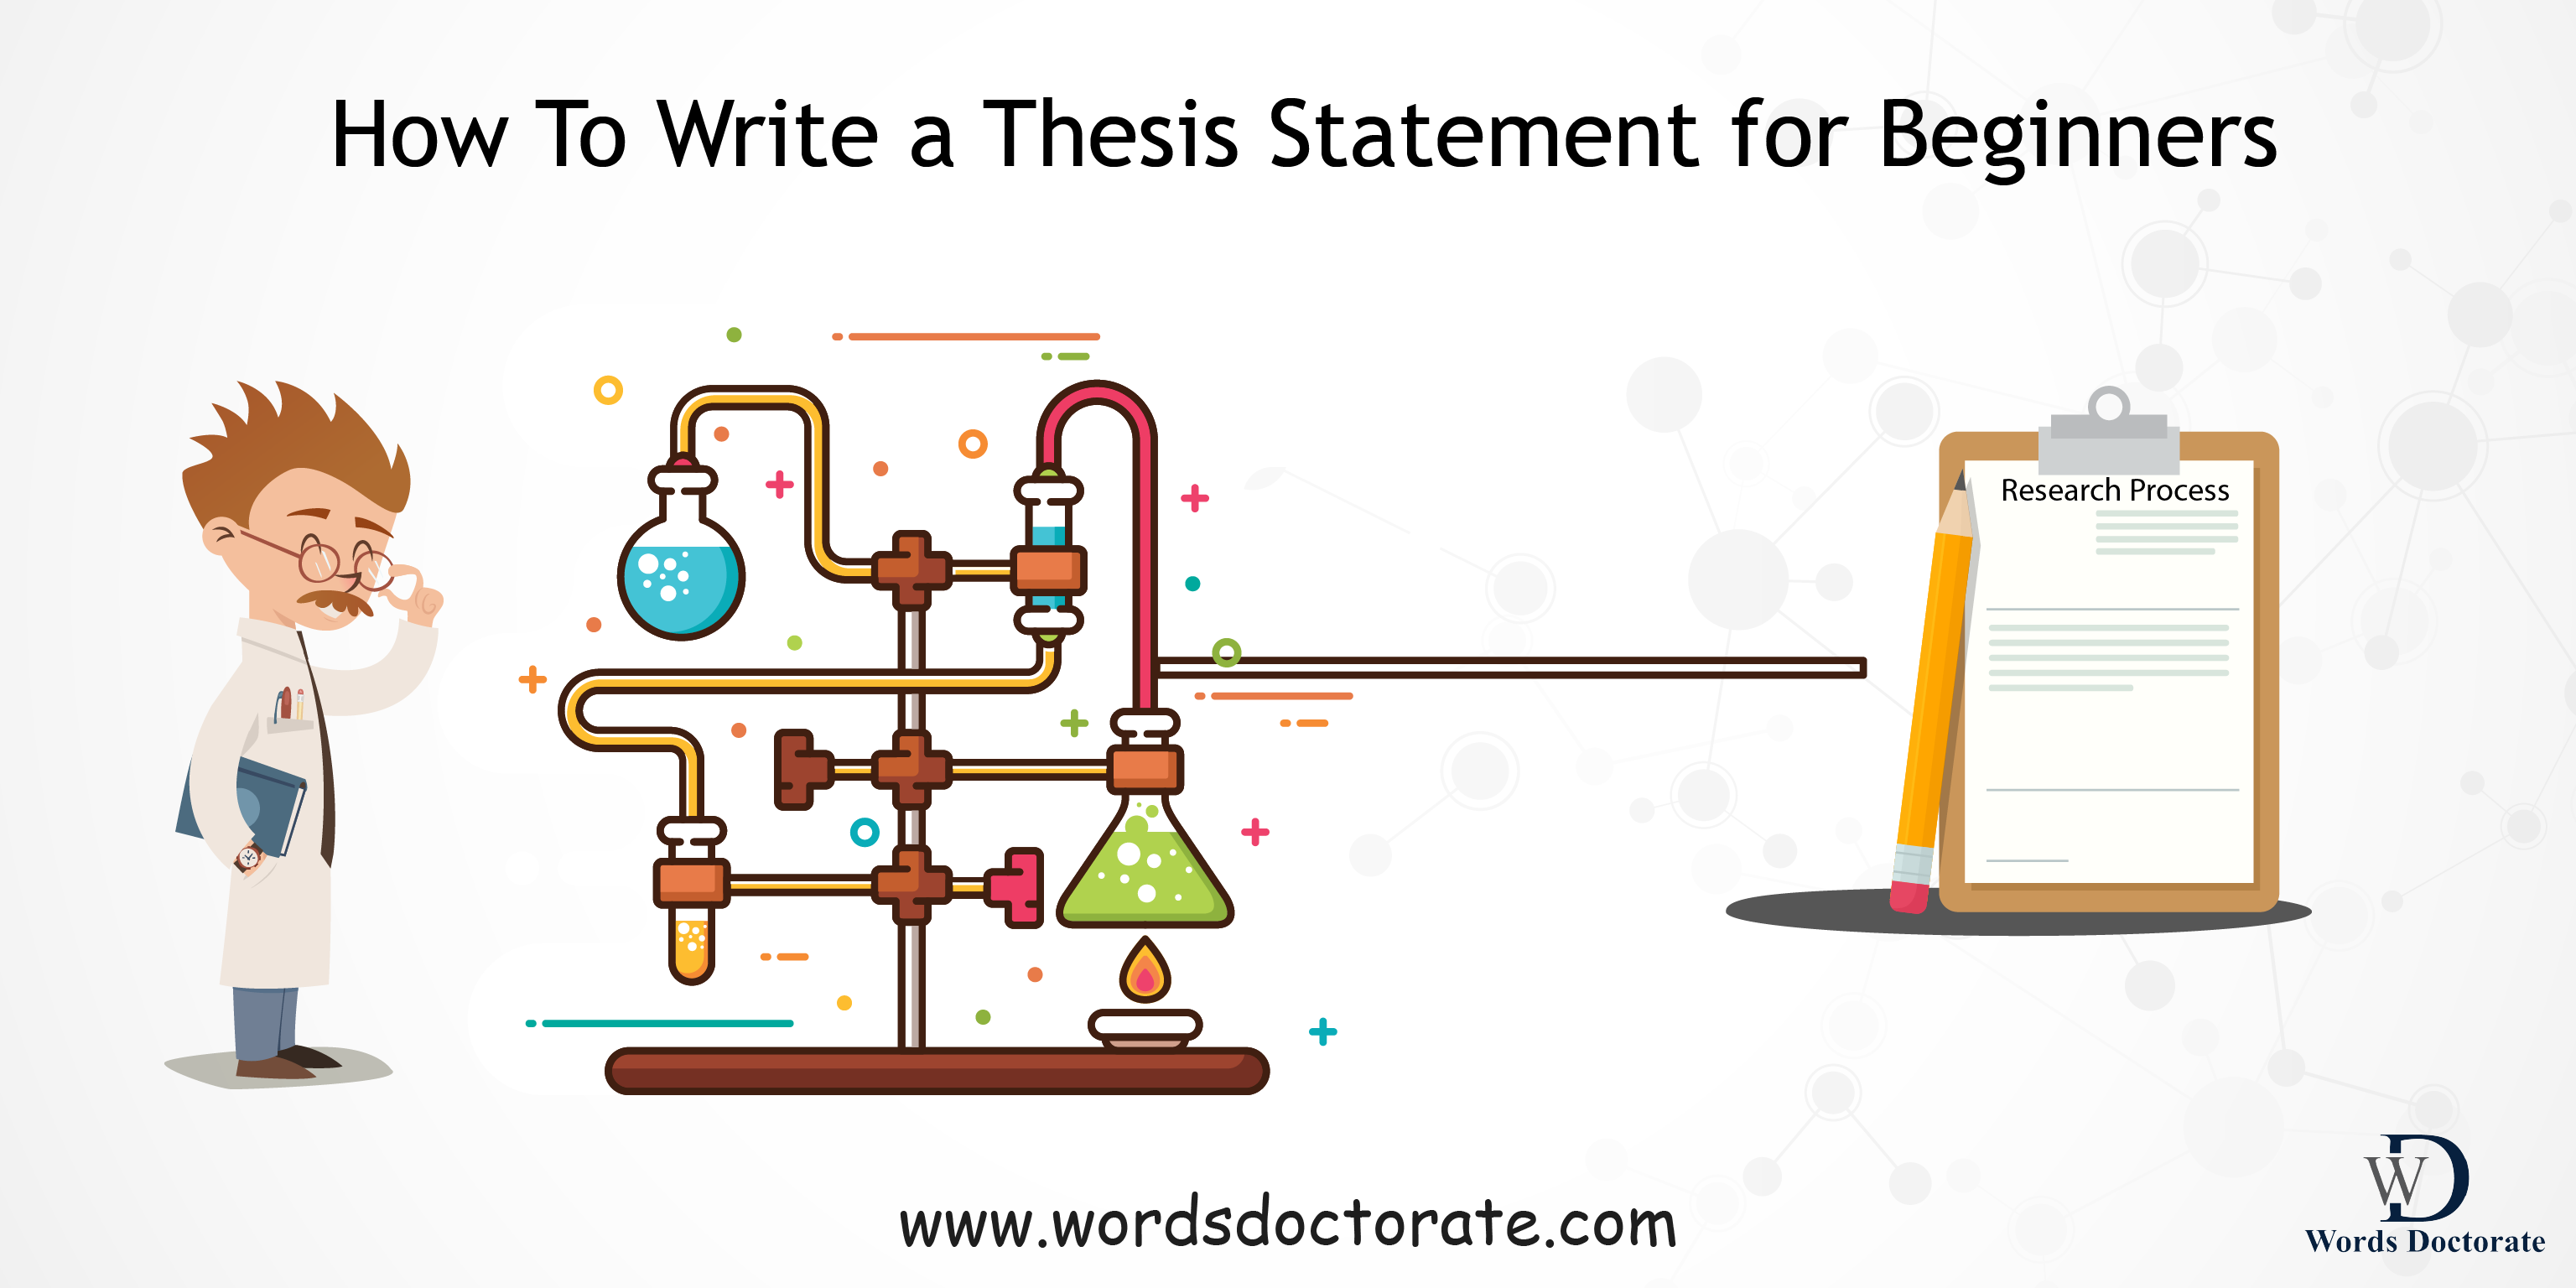 How to Write a Thesis Statement for Beginners